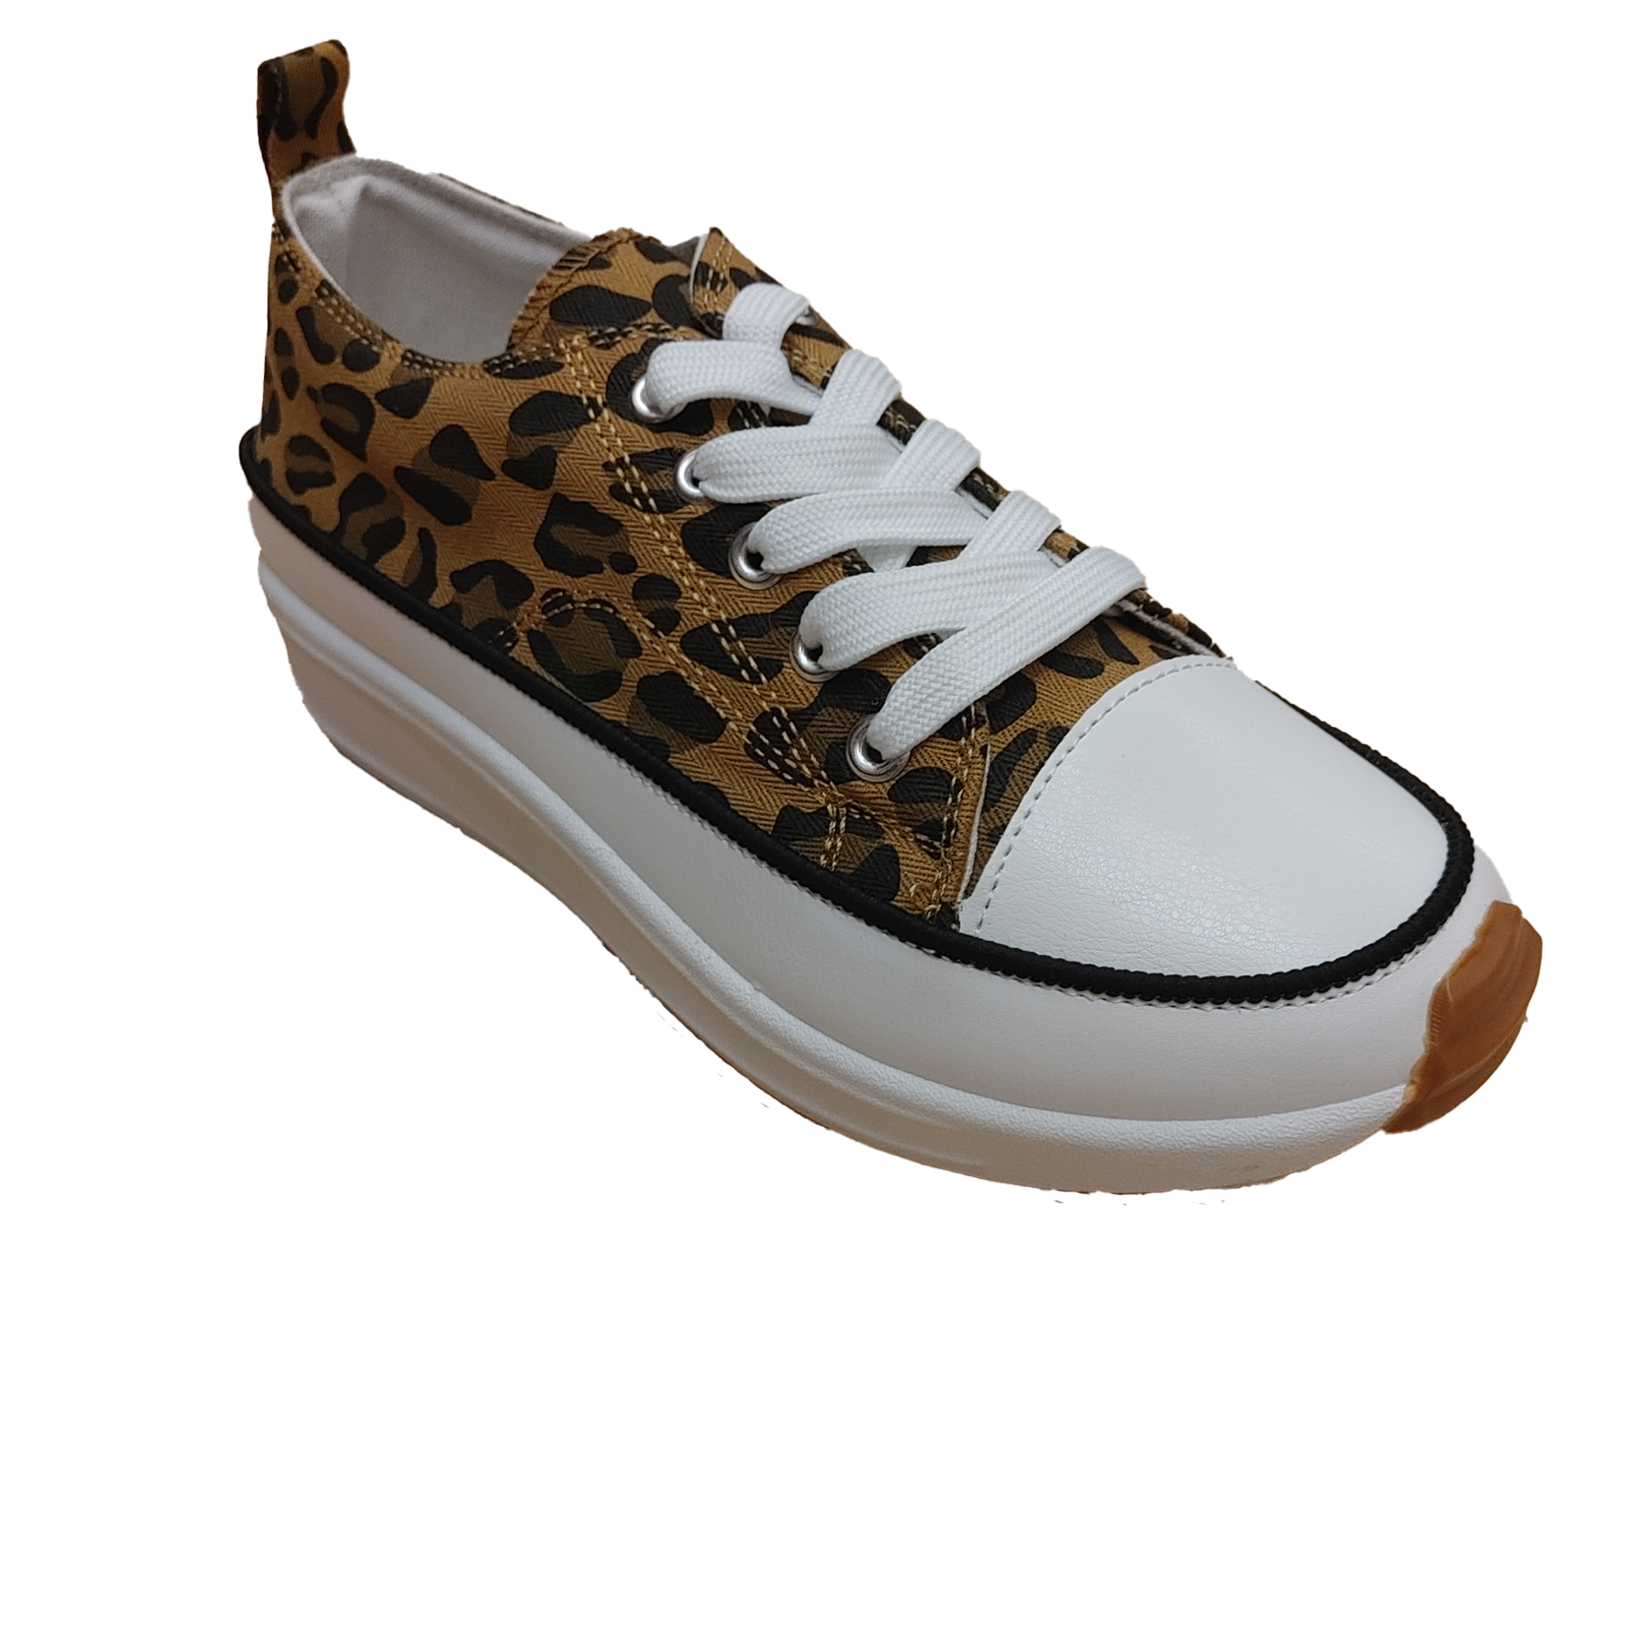 snickers 2.0 Snickers 2.0 lace up canvas printed casual sneaker, sneakers, shoes, shoe